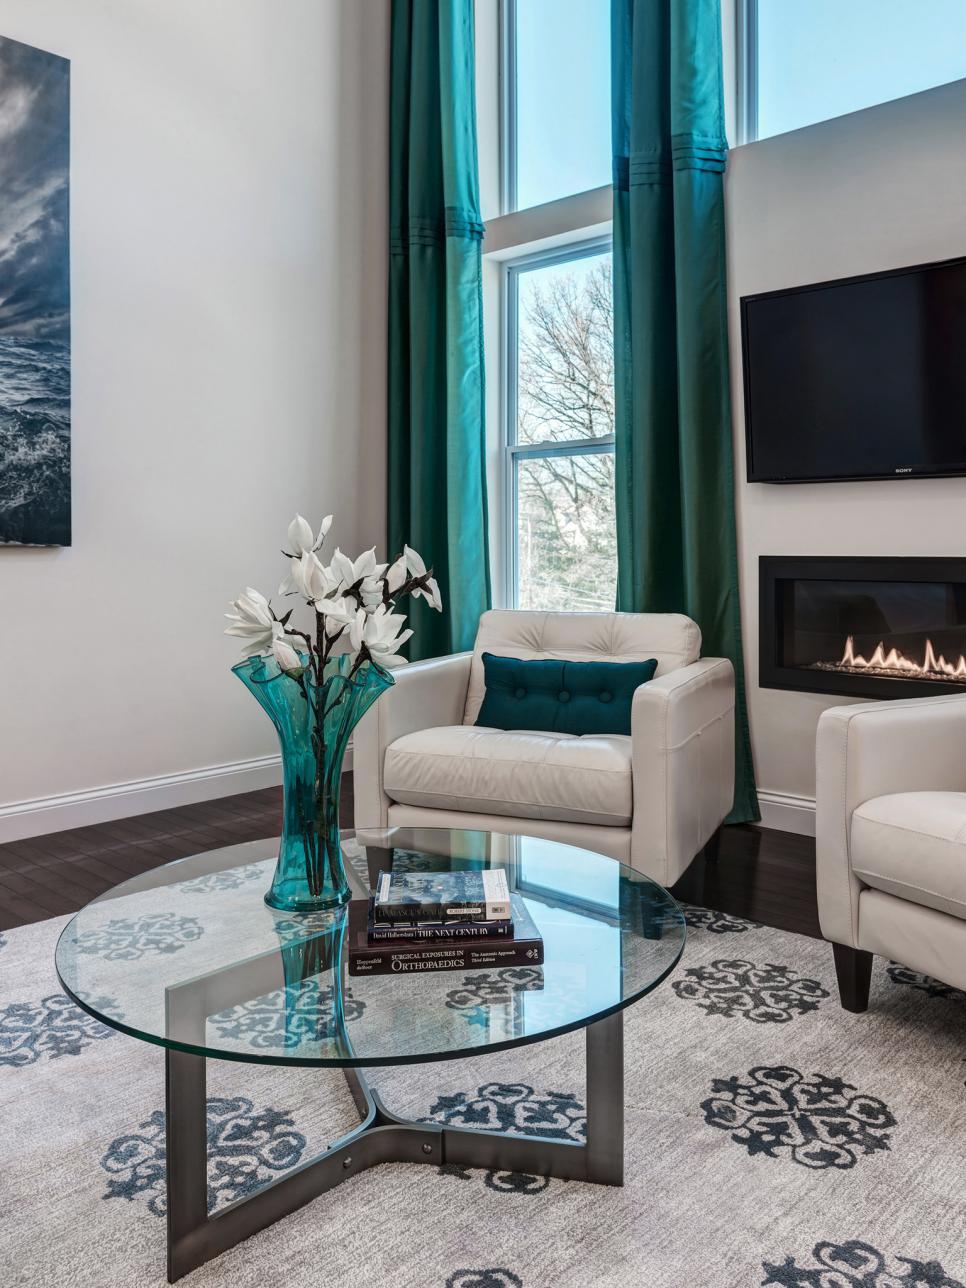 Contemporary Living Room With Turquoise Drapes and Wall Fireplace